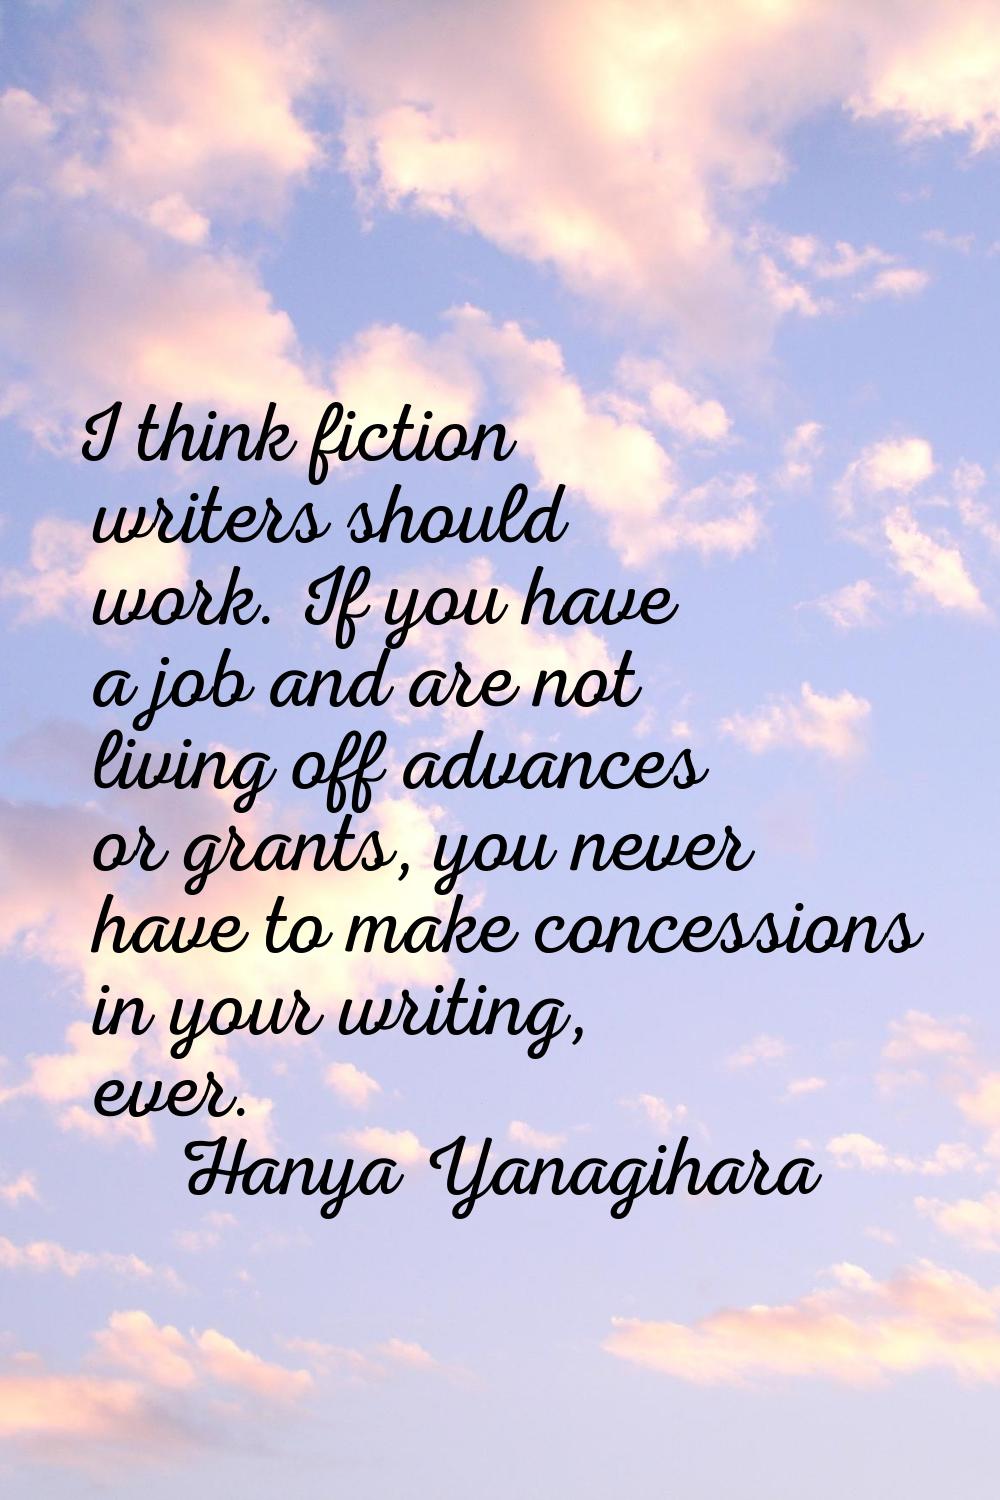 I think fiction writers should work. If you have a job and are not living off advances or grants, y